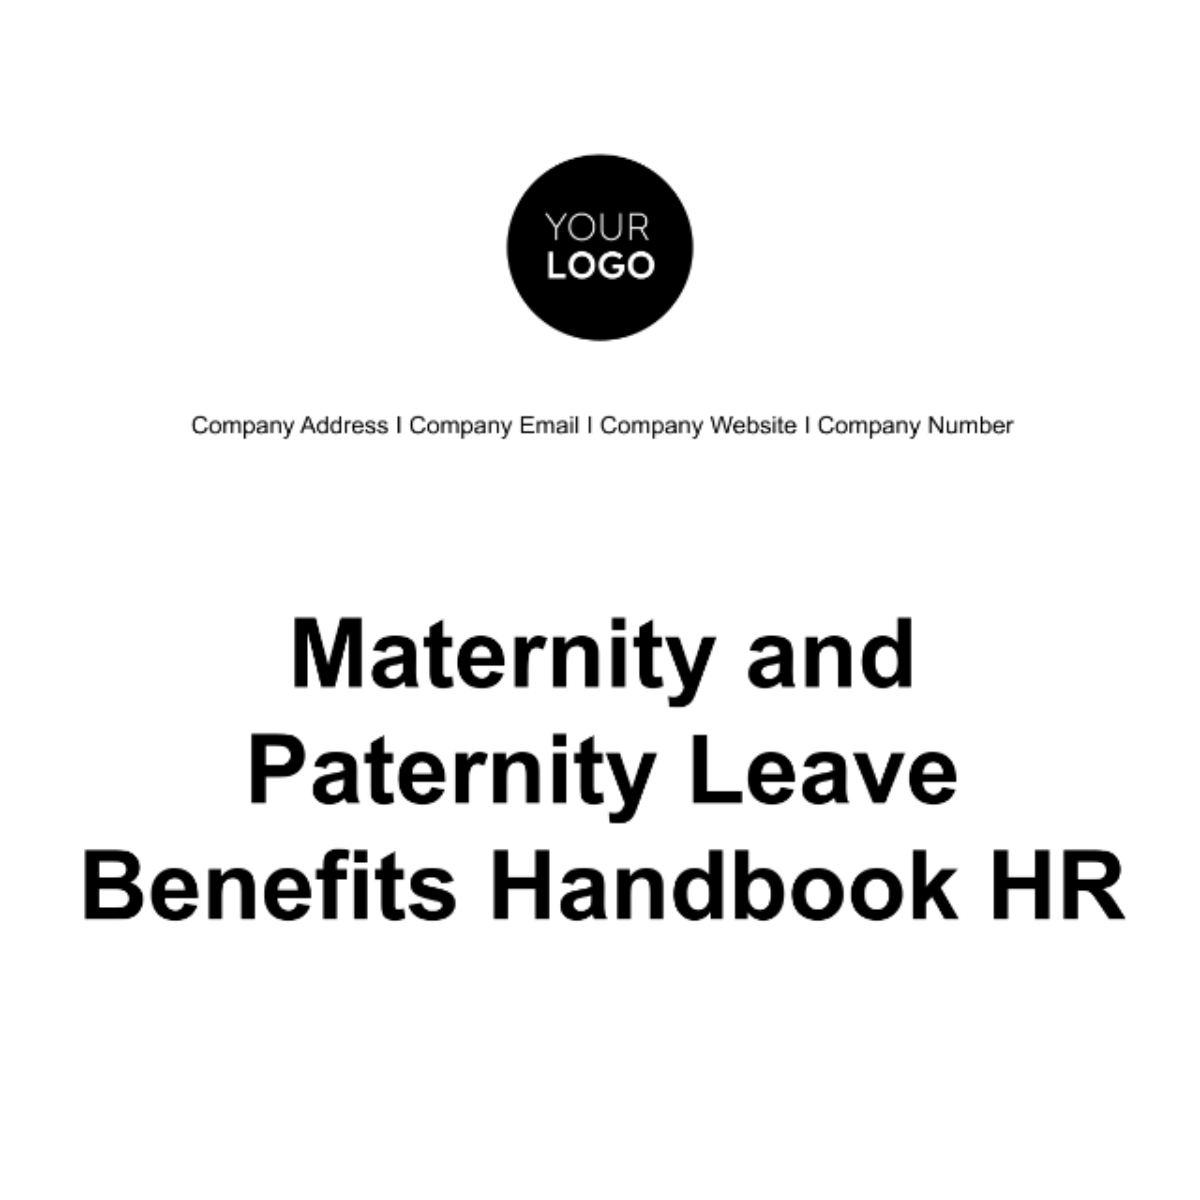 Maternity and Paternity Leave Benefits Handbook HR Template